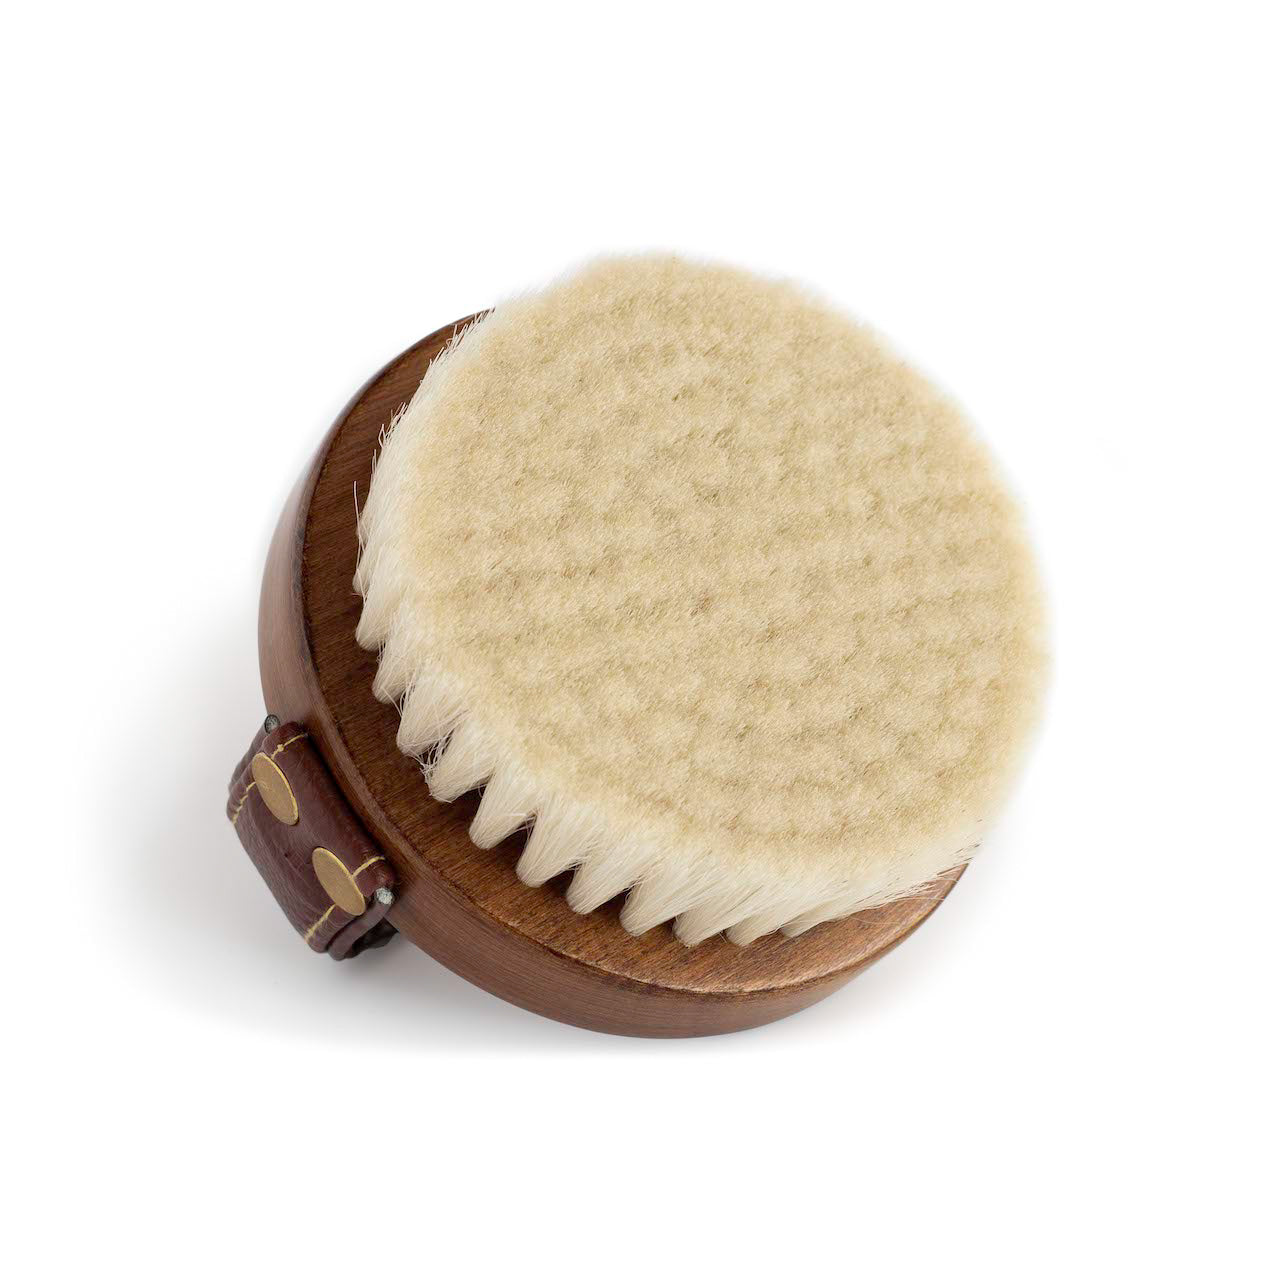 A view of the underside of the Hairy Pony Face Brush, with the soft, cream coloured bristles showing.